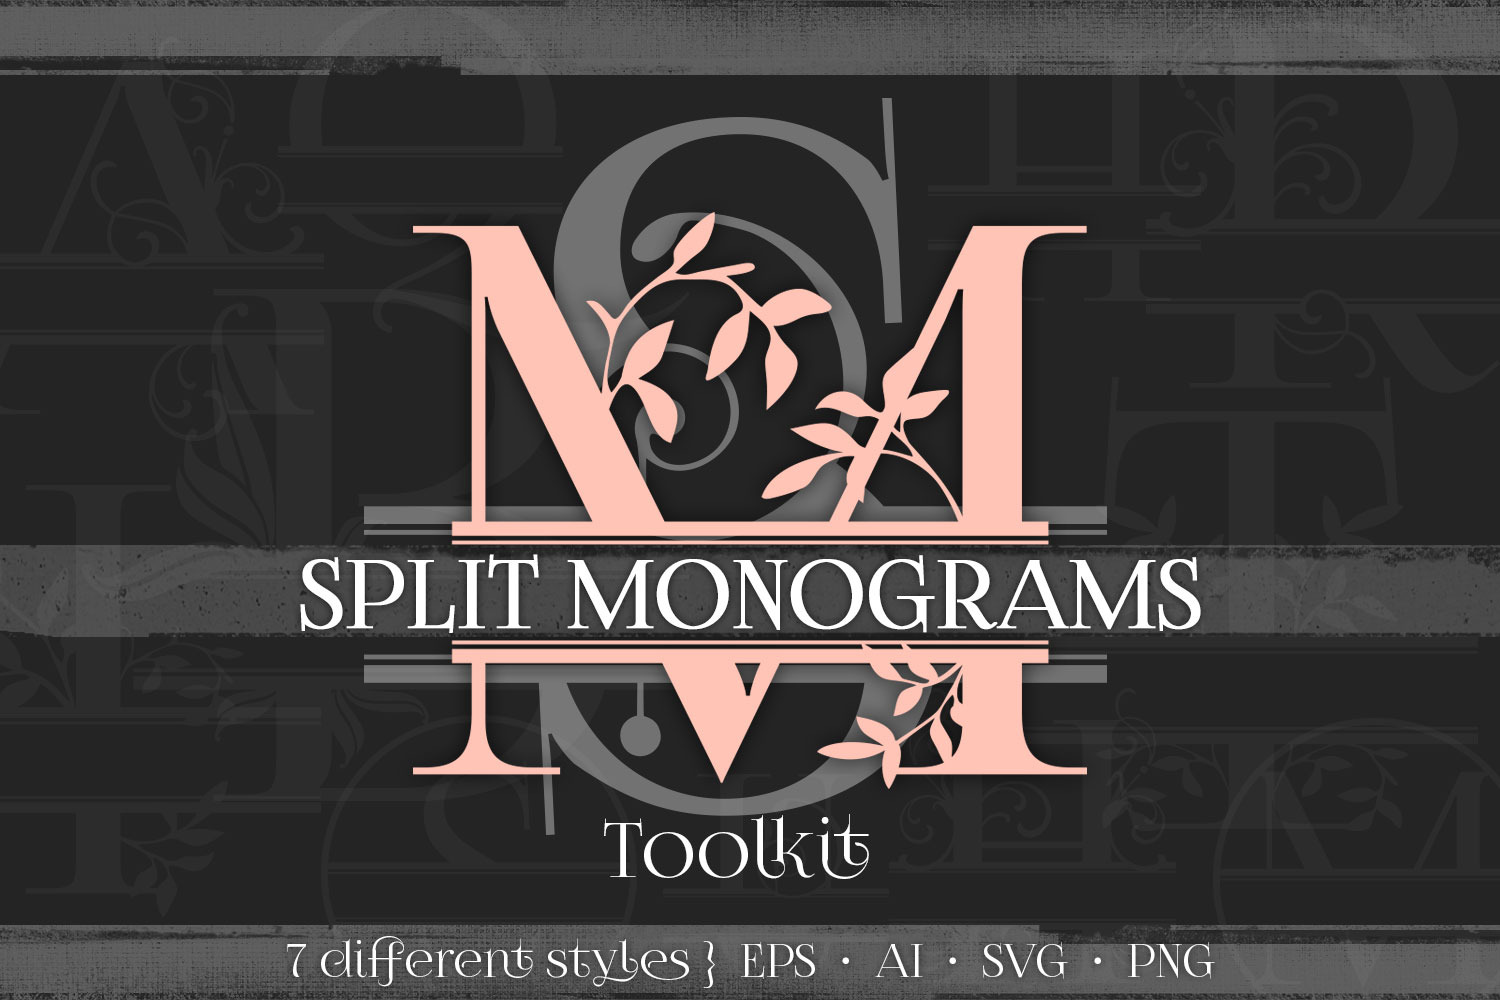 Download Split Monograms Vector Toolkit ~ Graphic Objects ...